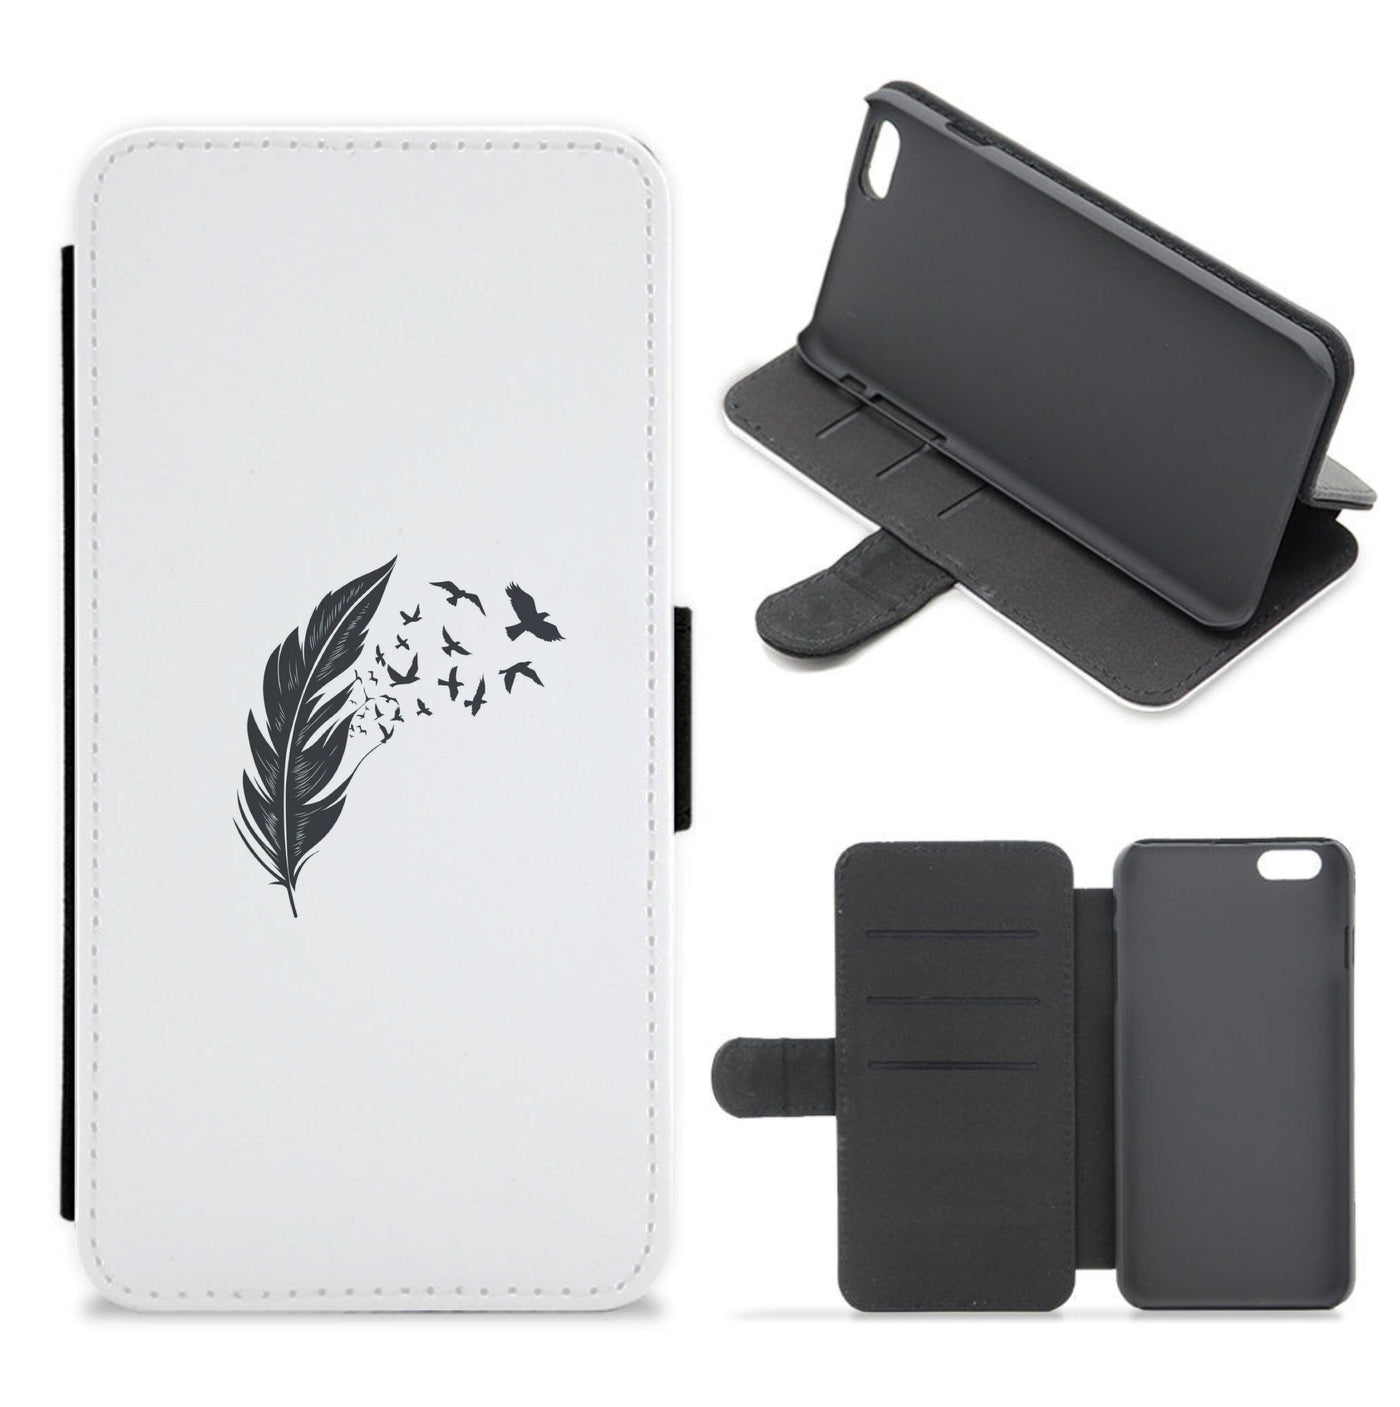 Birds From Feathers - The Originals Flip / Wallet Phone Case